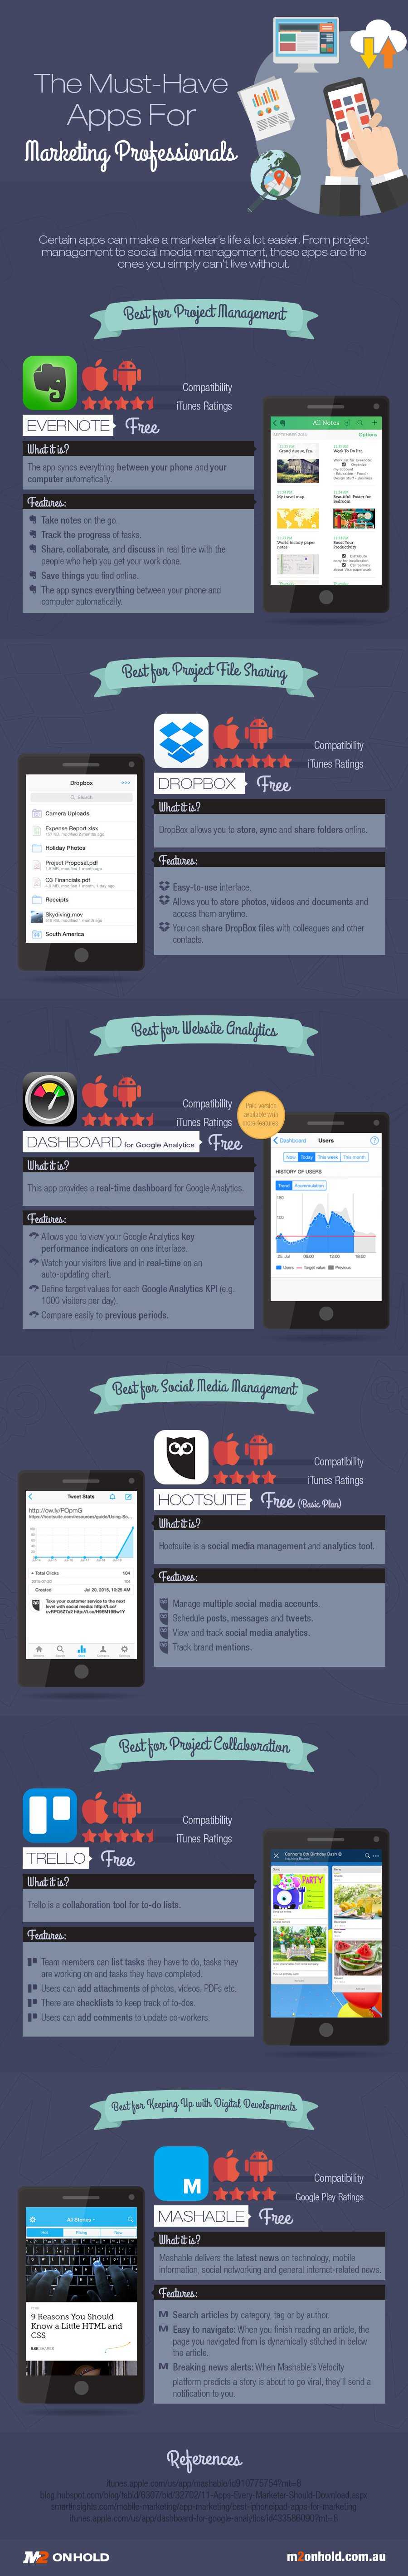 2015-12-25Must-Have-Apps-for-Marketing-Professionals-Infographic